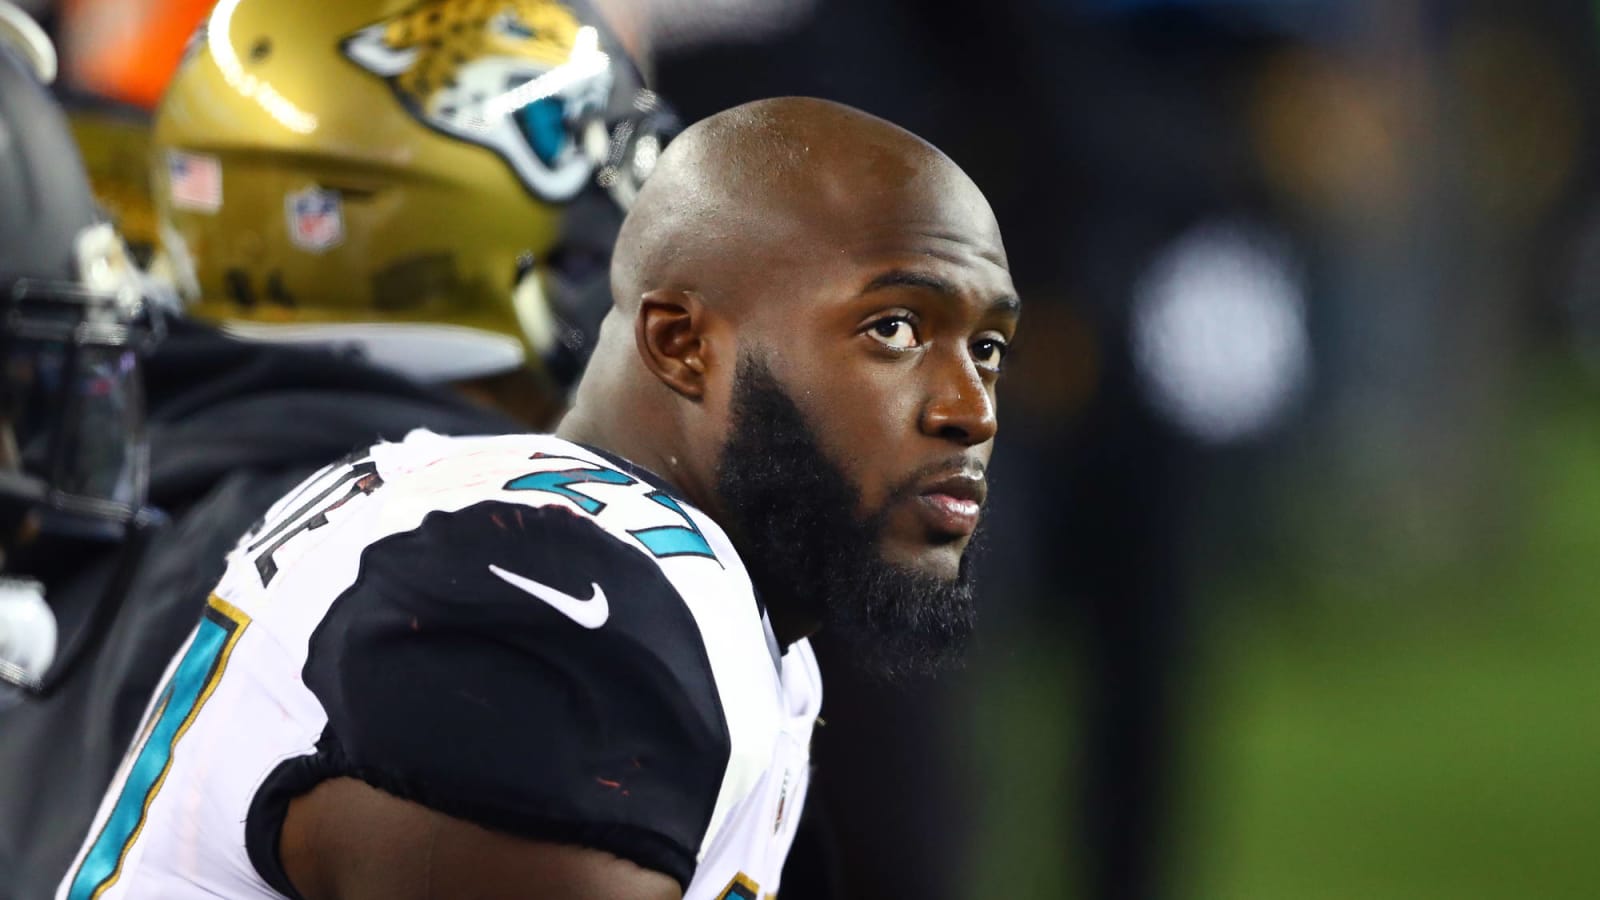 Fournette tells ‘Madden’ to remove him from game due to rating